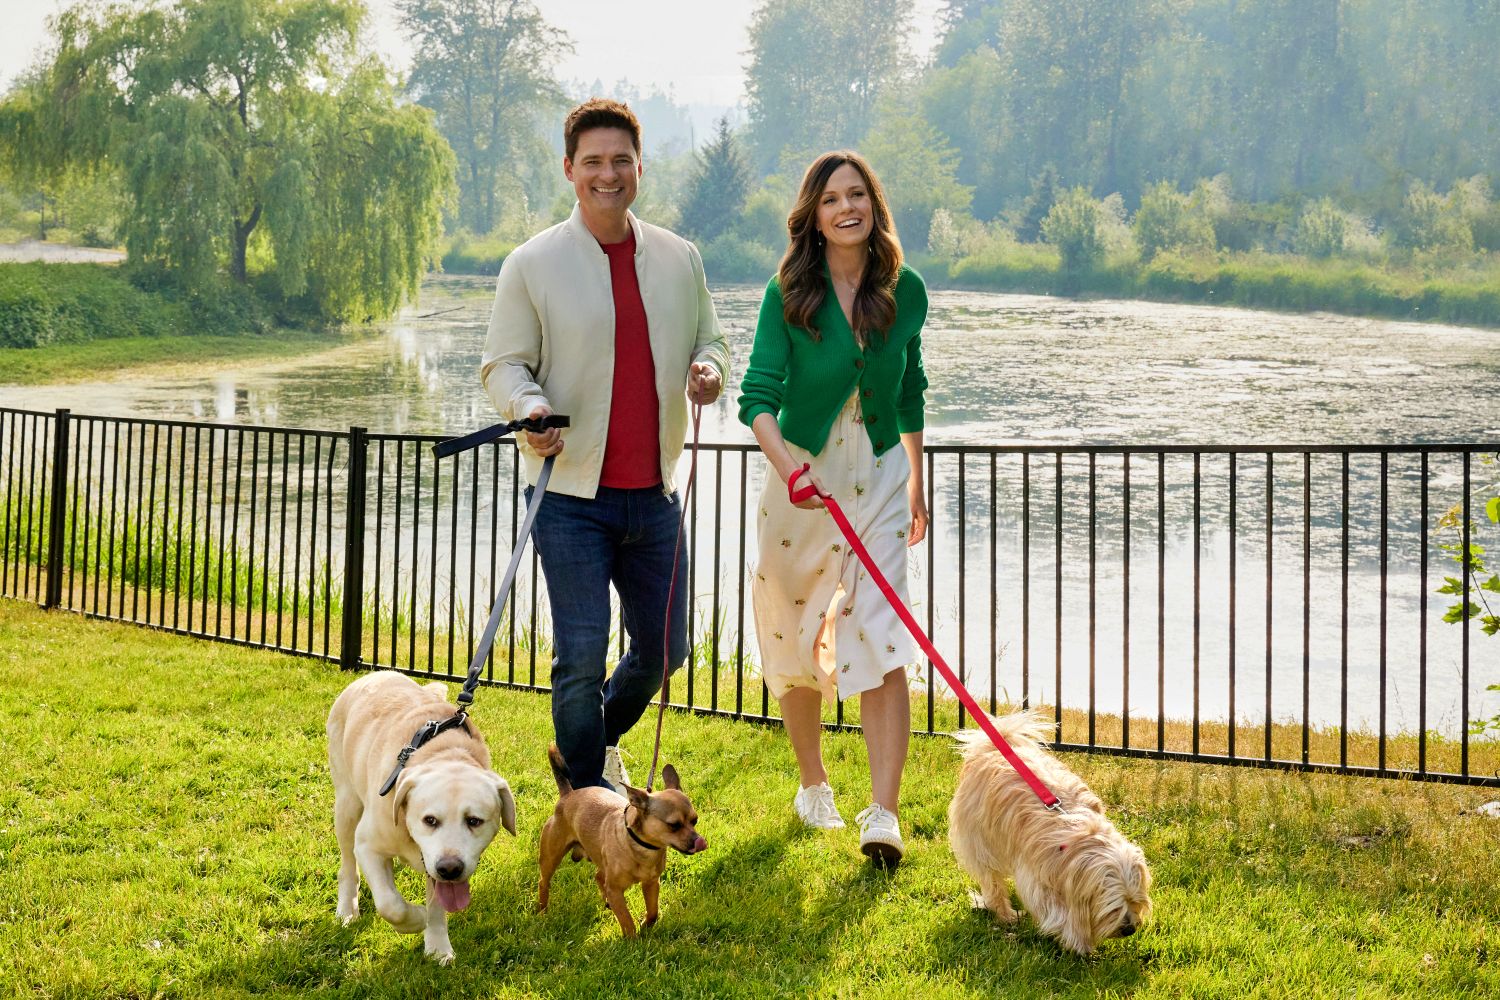 The More Love Grows on Hallmark Movies & Mysteries